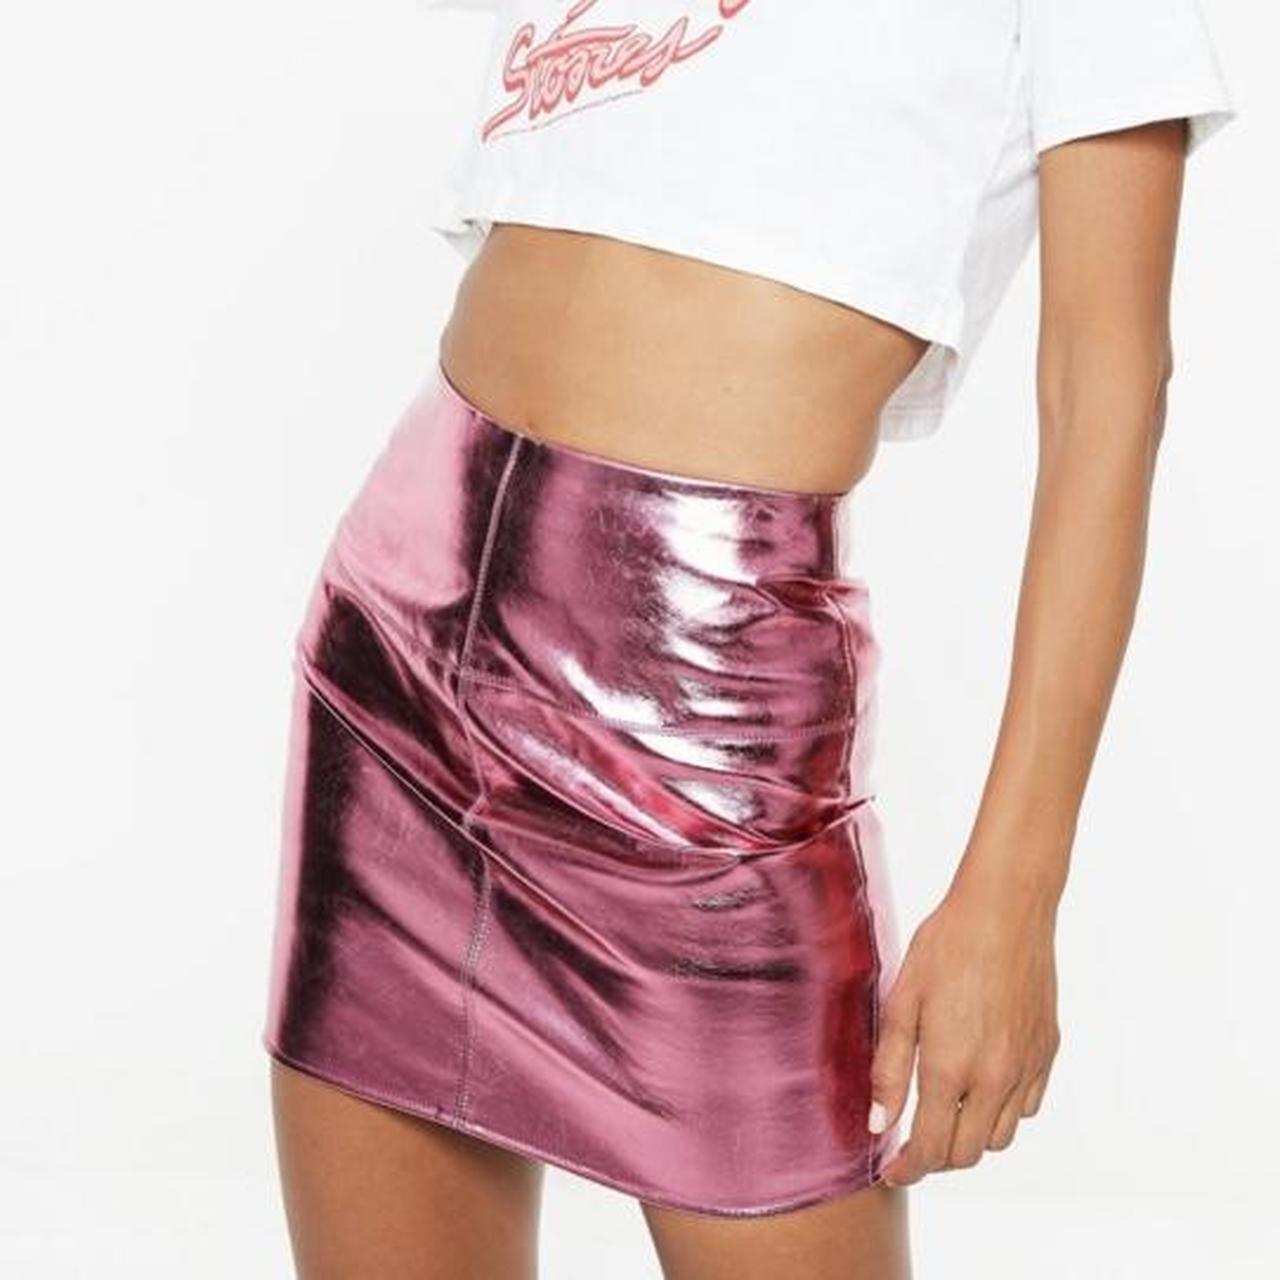 Missguided Women's Pink and Black Skirt | Depop